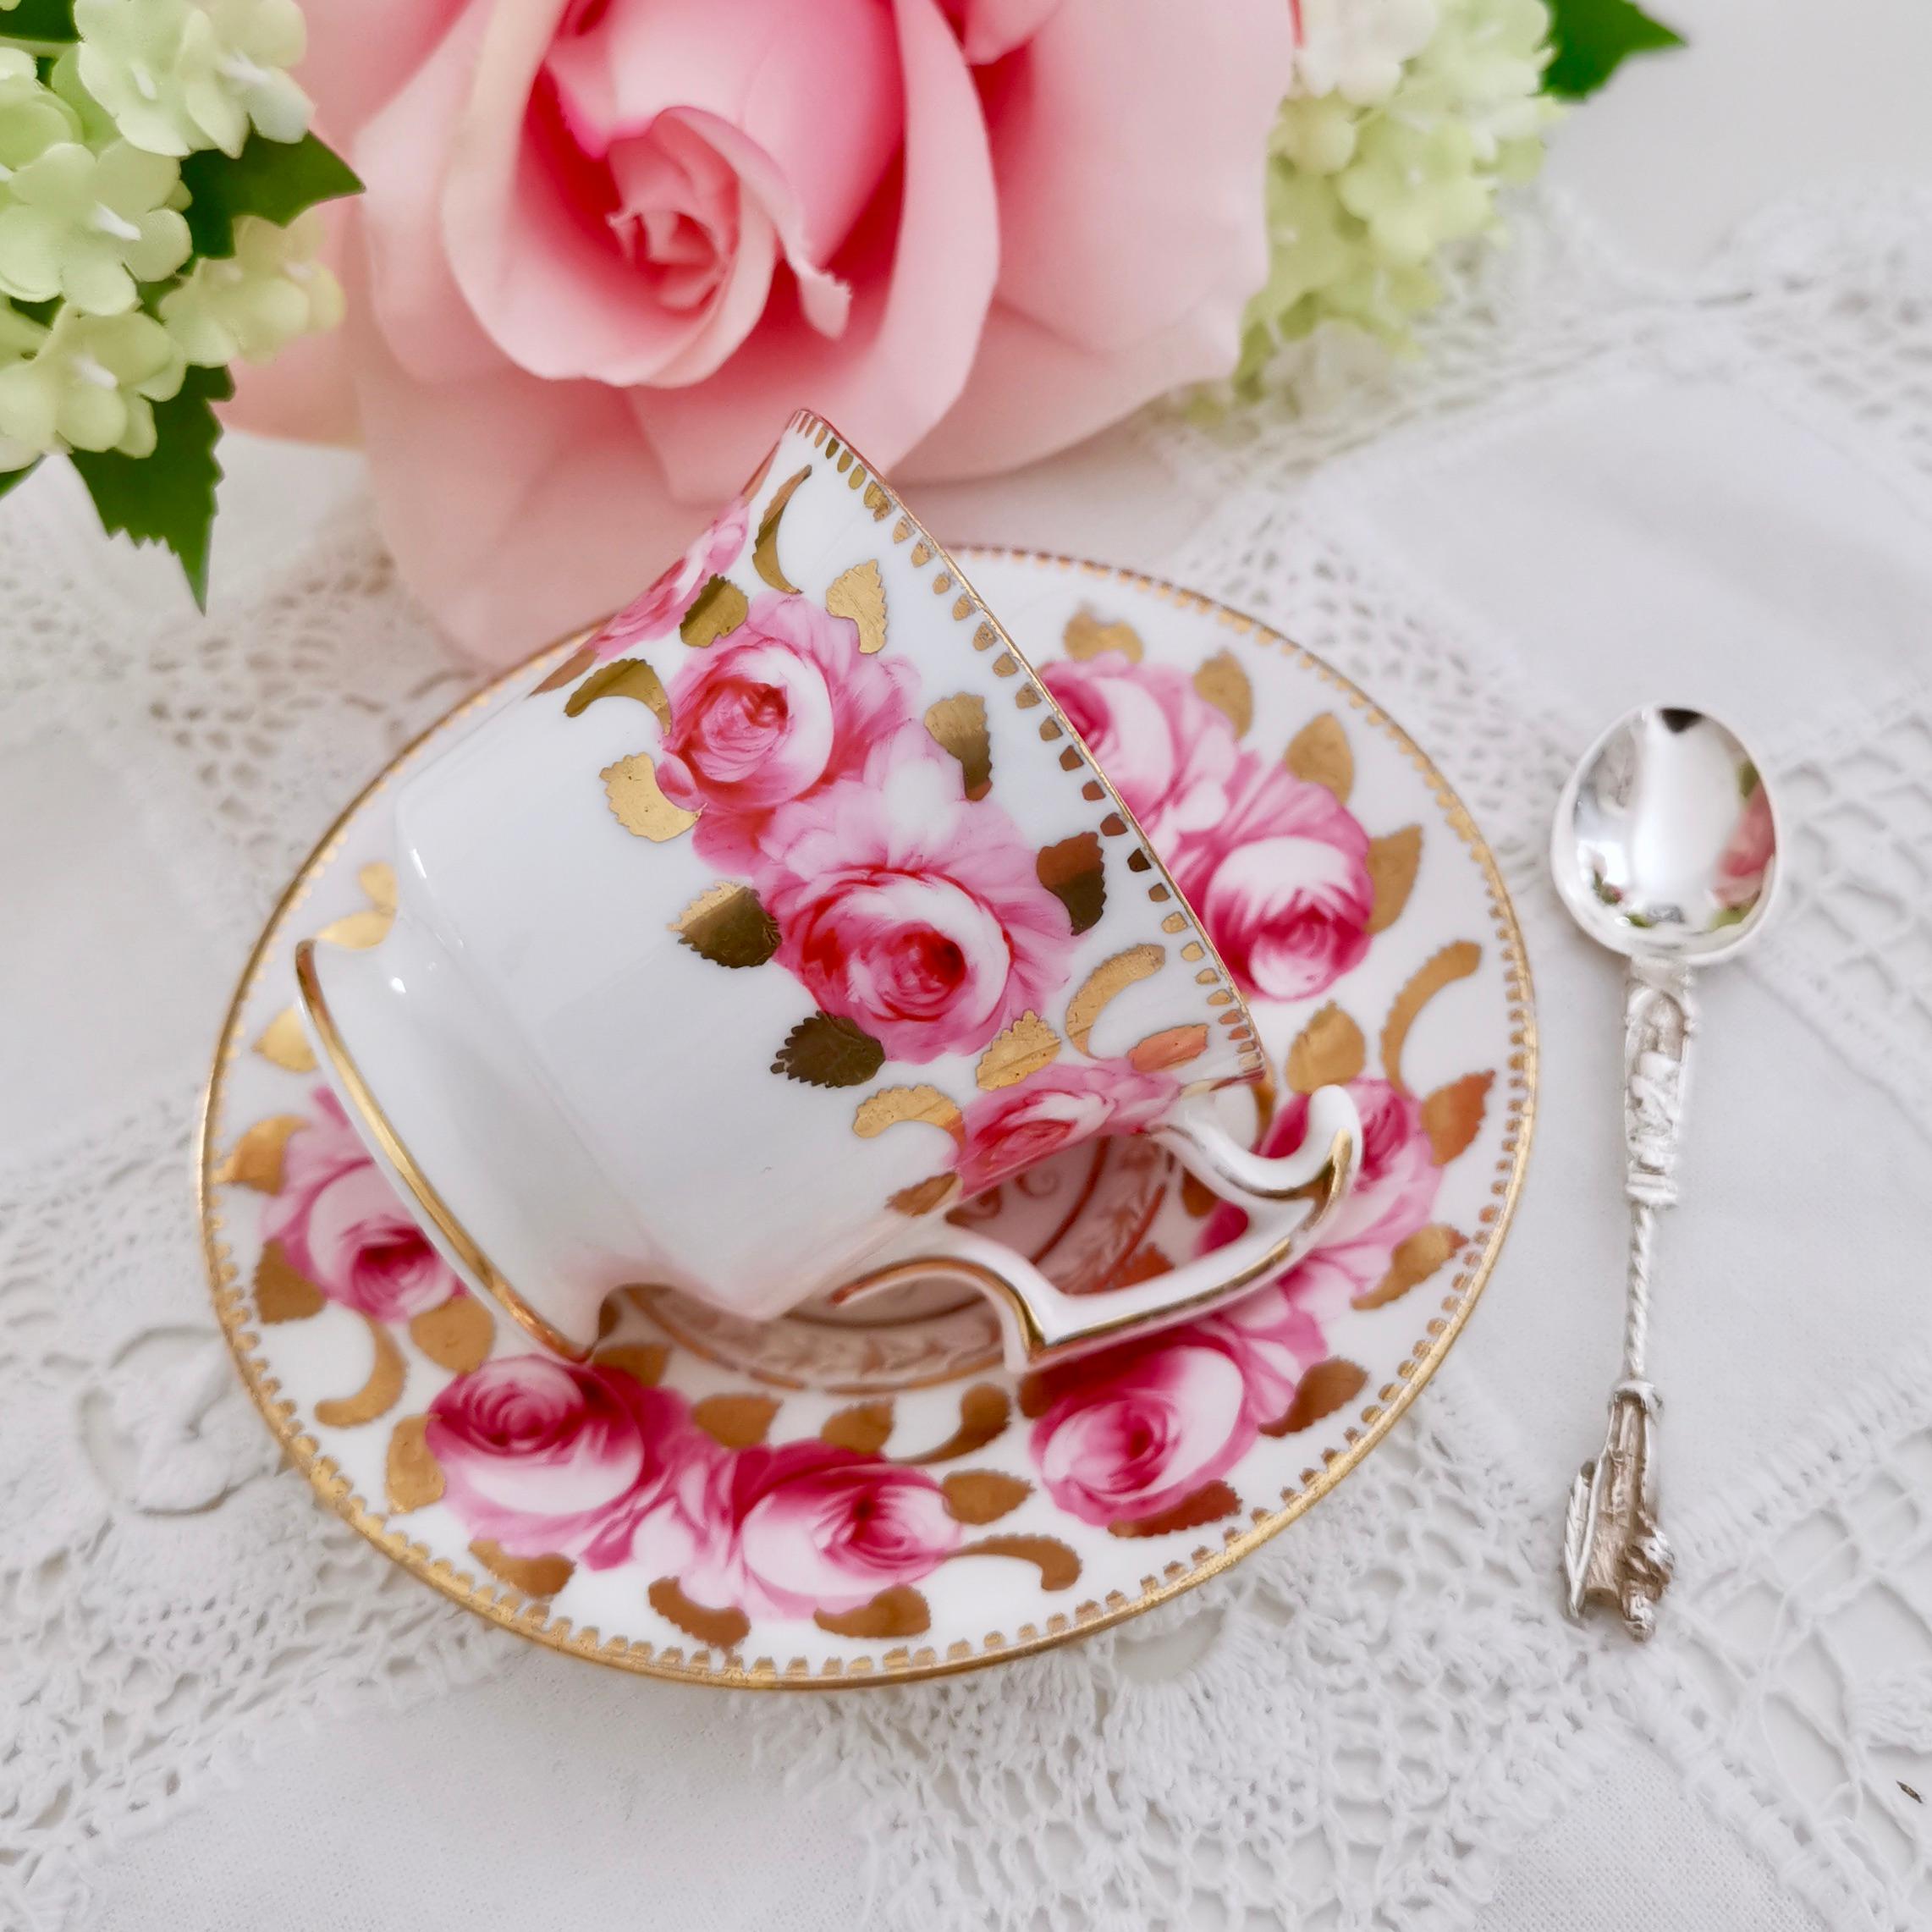 This is a beautiful coffee cup and saucer made by an unknown Staffordshire maker between 1820 and 1825. This romantic cup and saucer would make a perfect Valentine's Day gift!

This set has a tight little crack, and therefore it is sold 